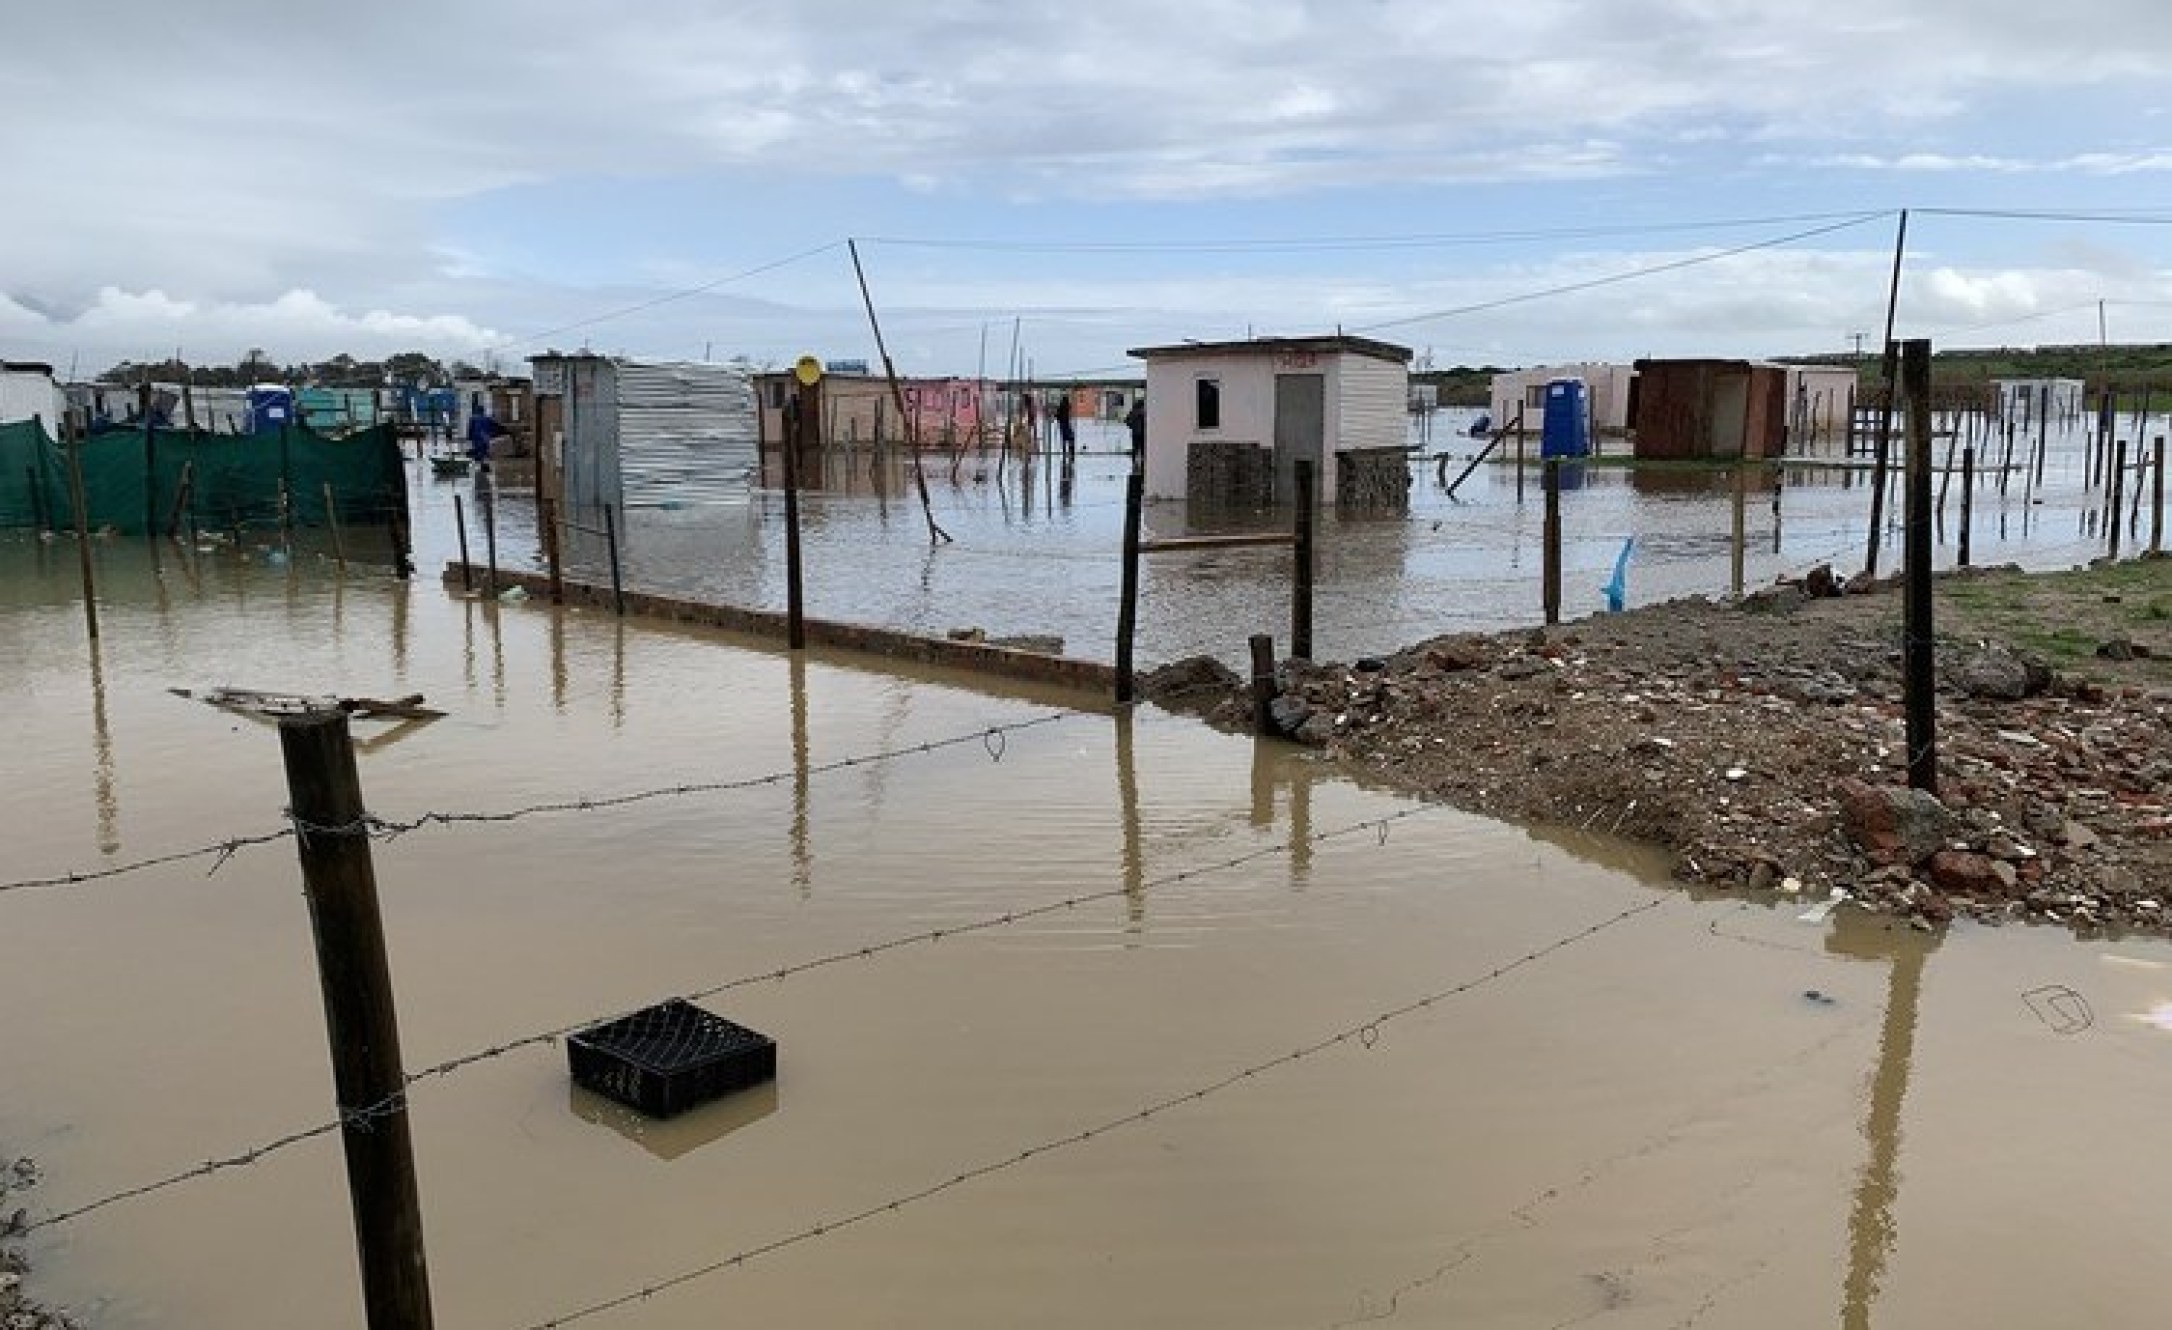 South Africa Storm Causes Flooding in Cape Town